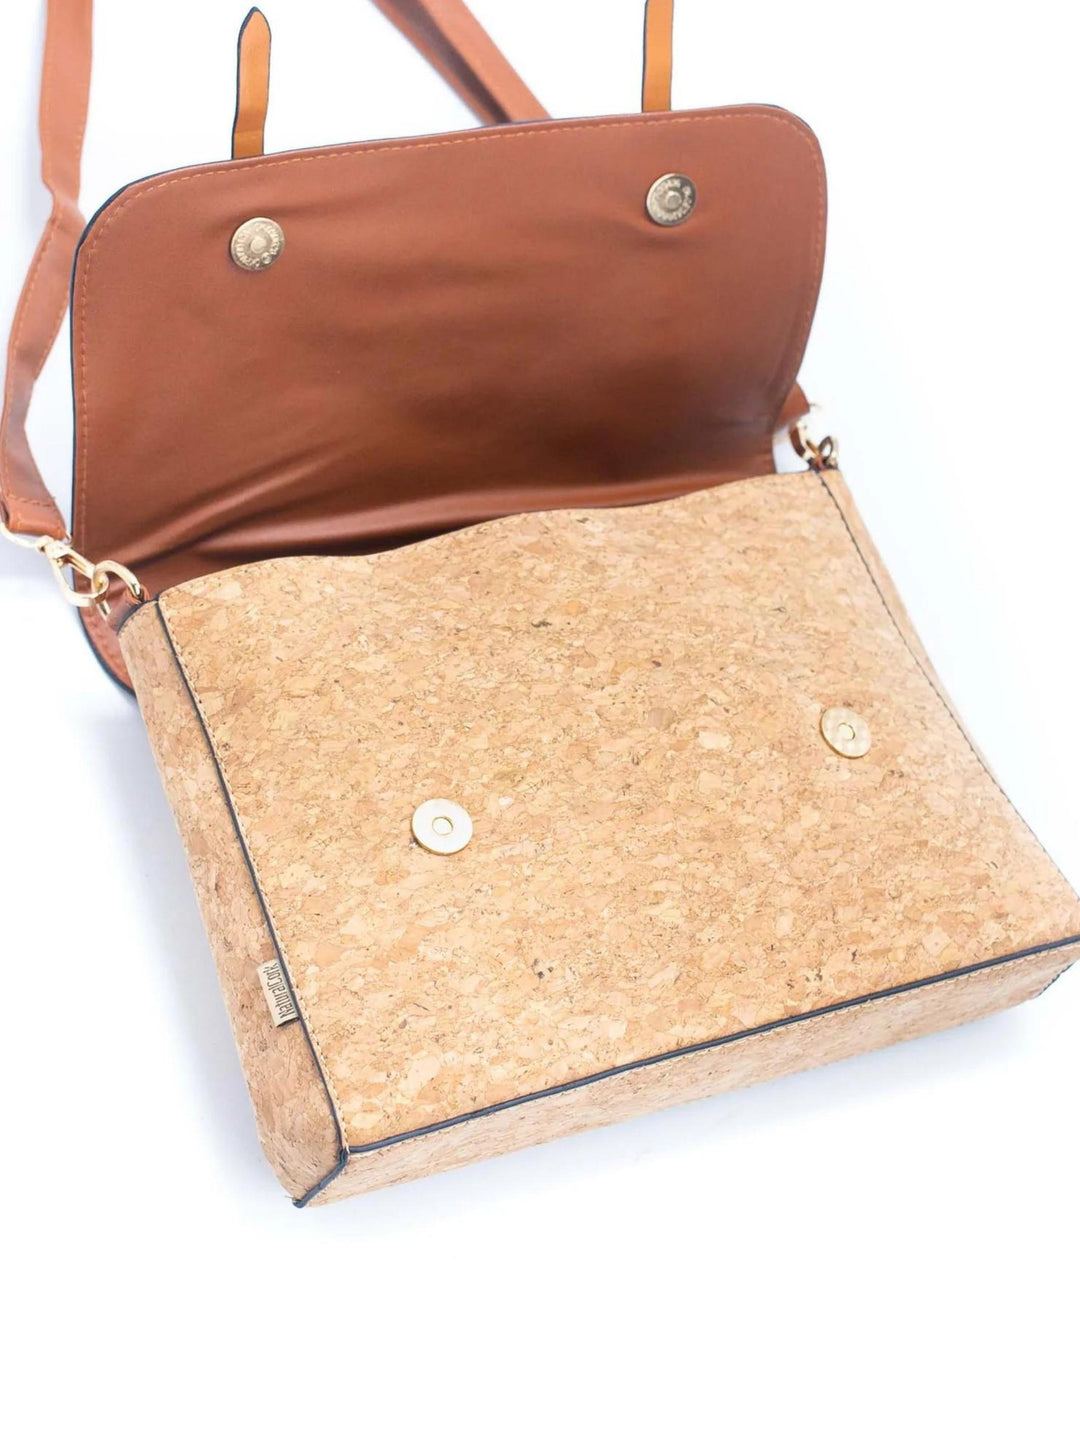 Vegan Cork Handbags, Wallets and Purses Made in Portugal – We Are